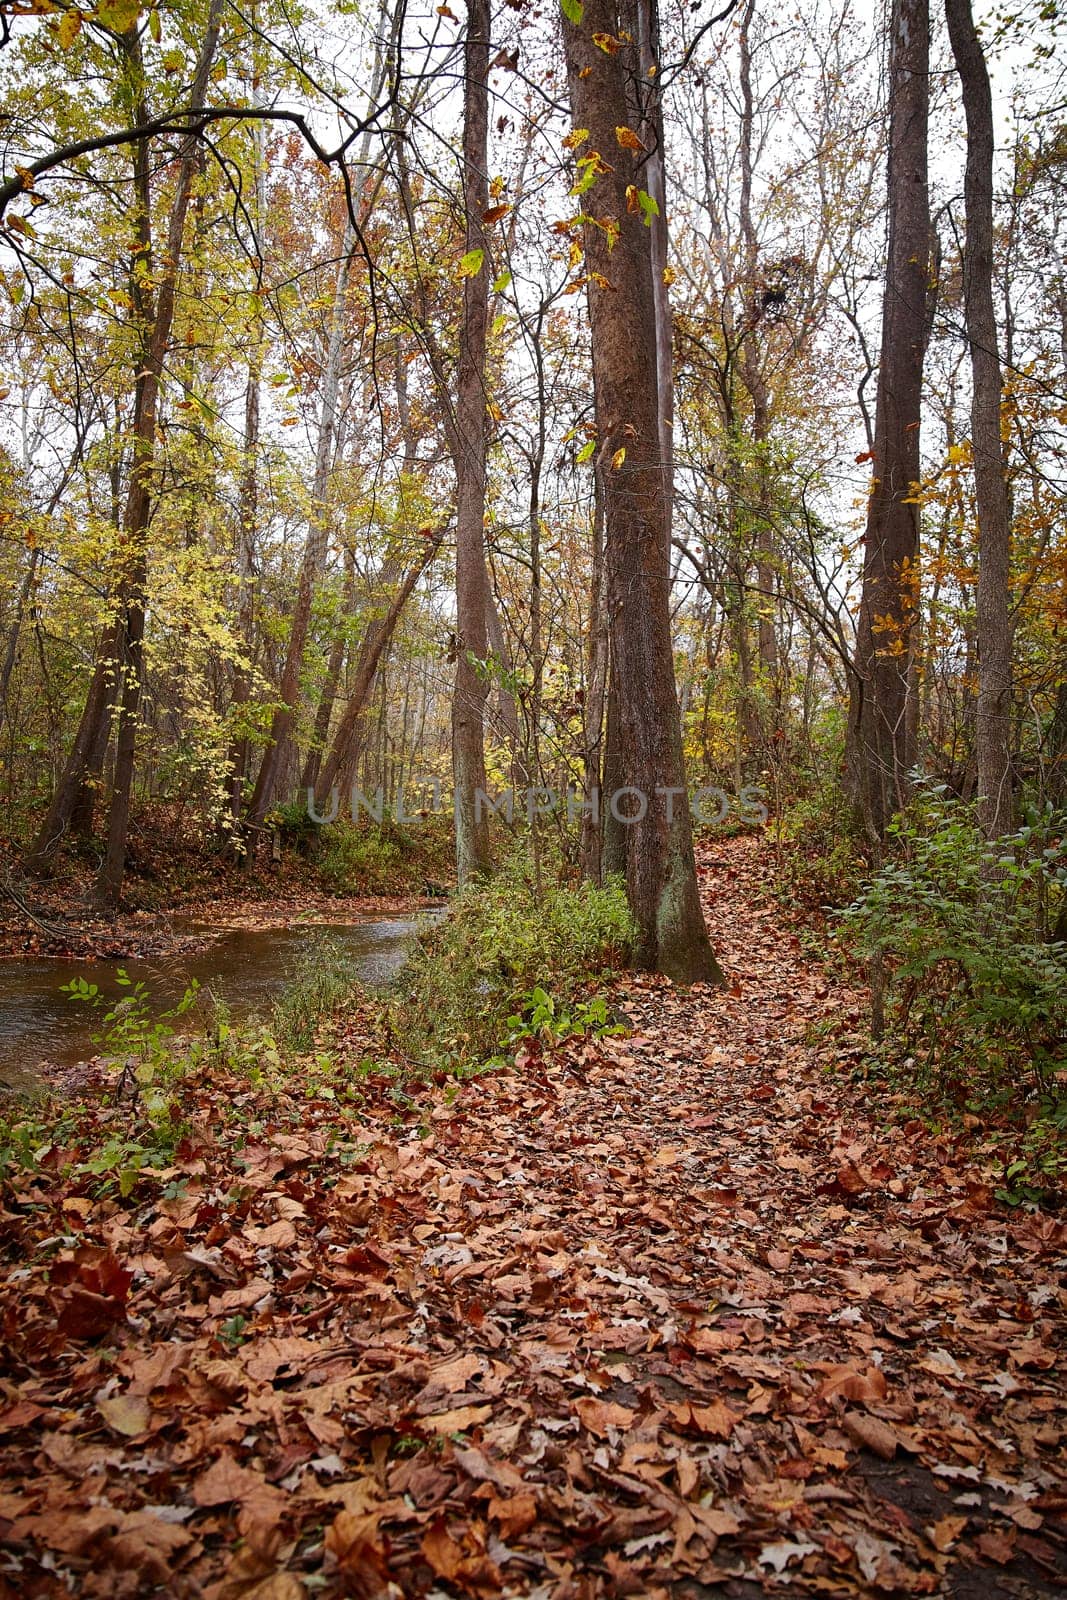 Tranquil autumn woodland path in Bicentennial Acres, Fort Wayne, Indiana. Enjoy a peaceful stroll amidst vibrant fall foliage and serene natural surroundings.